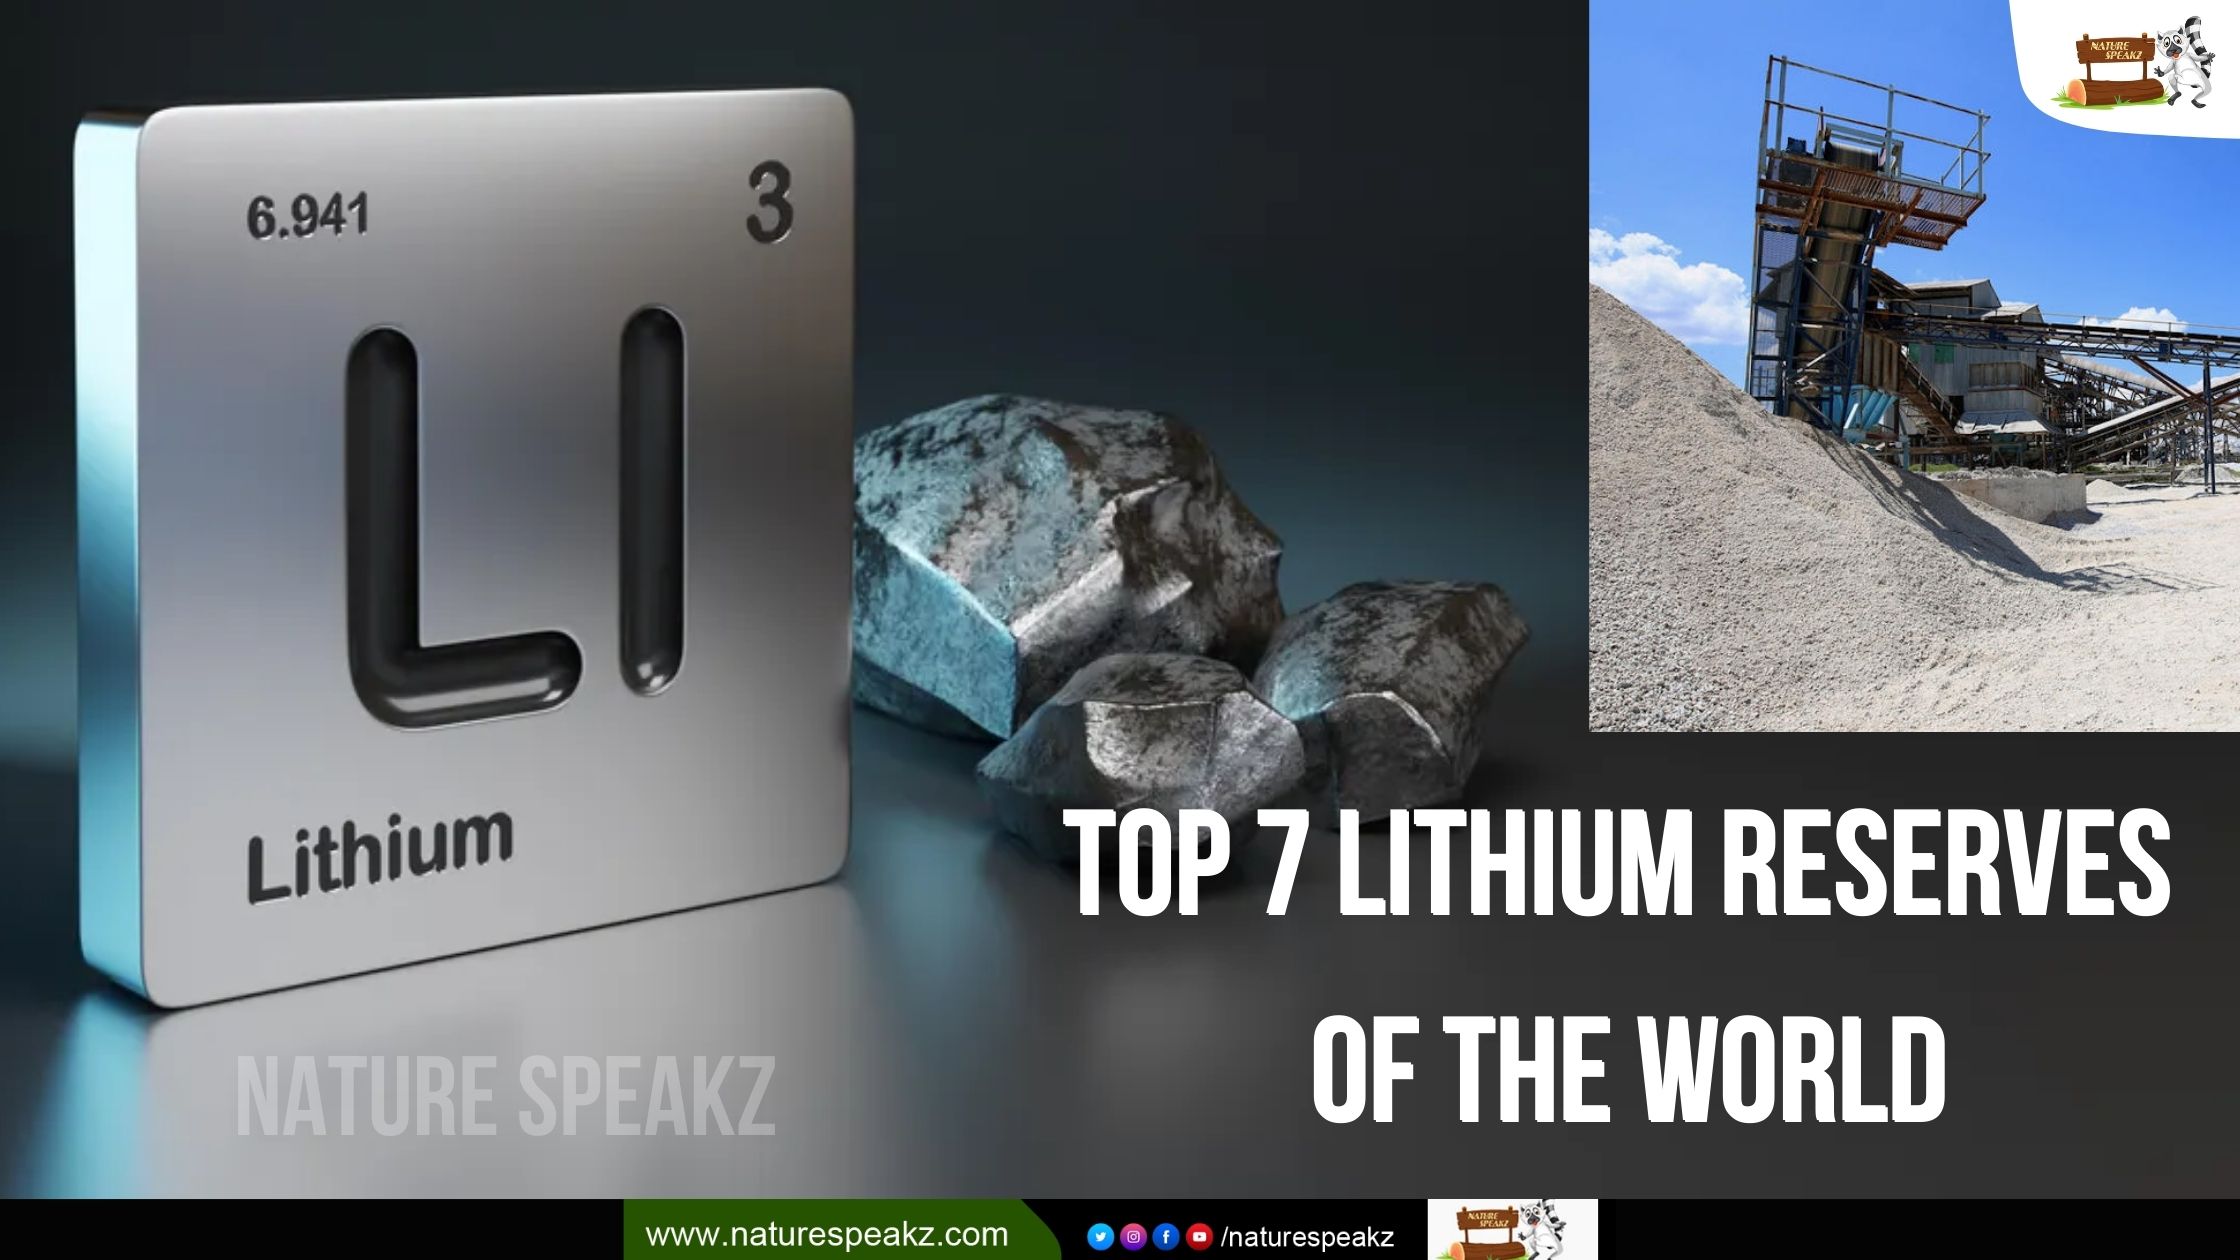 Top 7 Lithium Reserves of the World